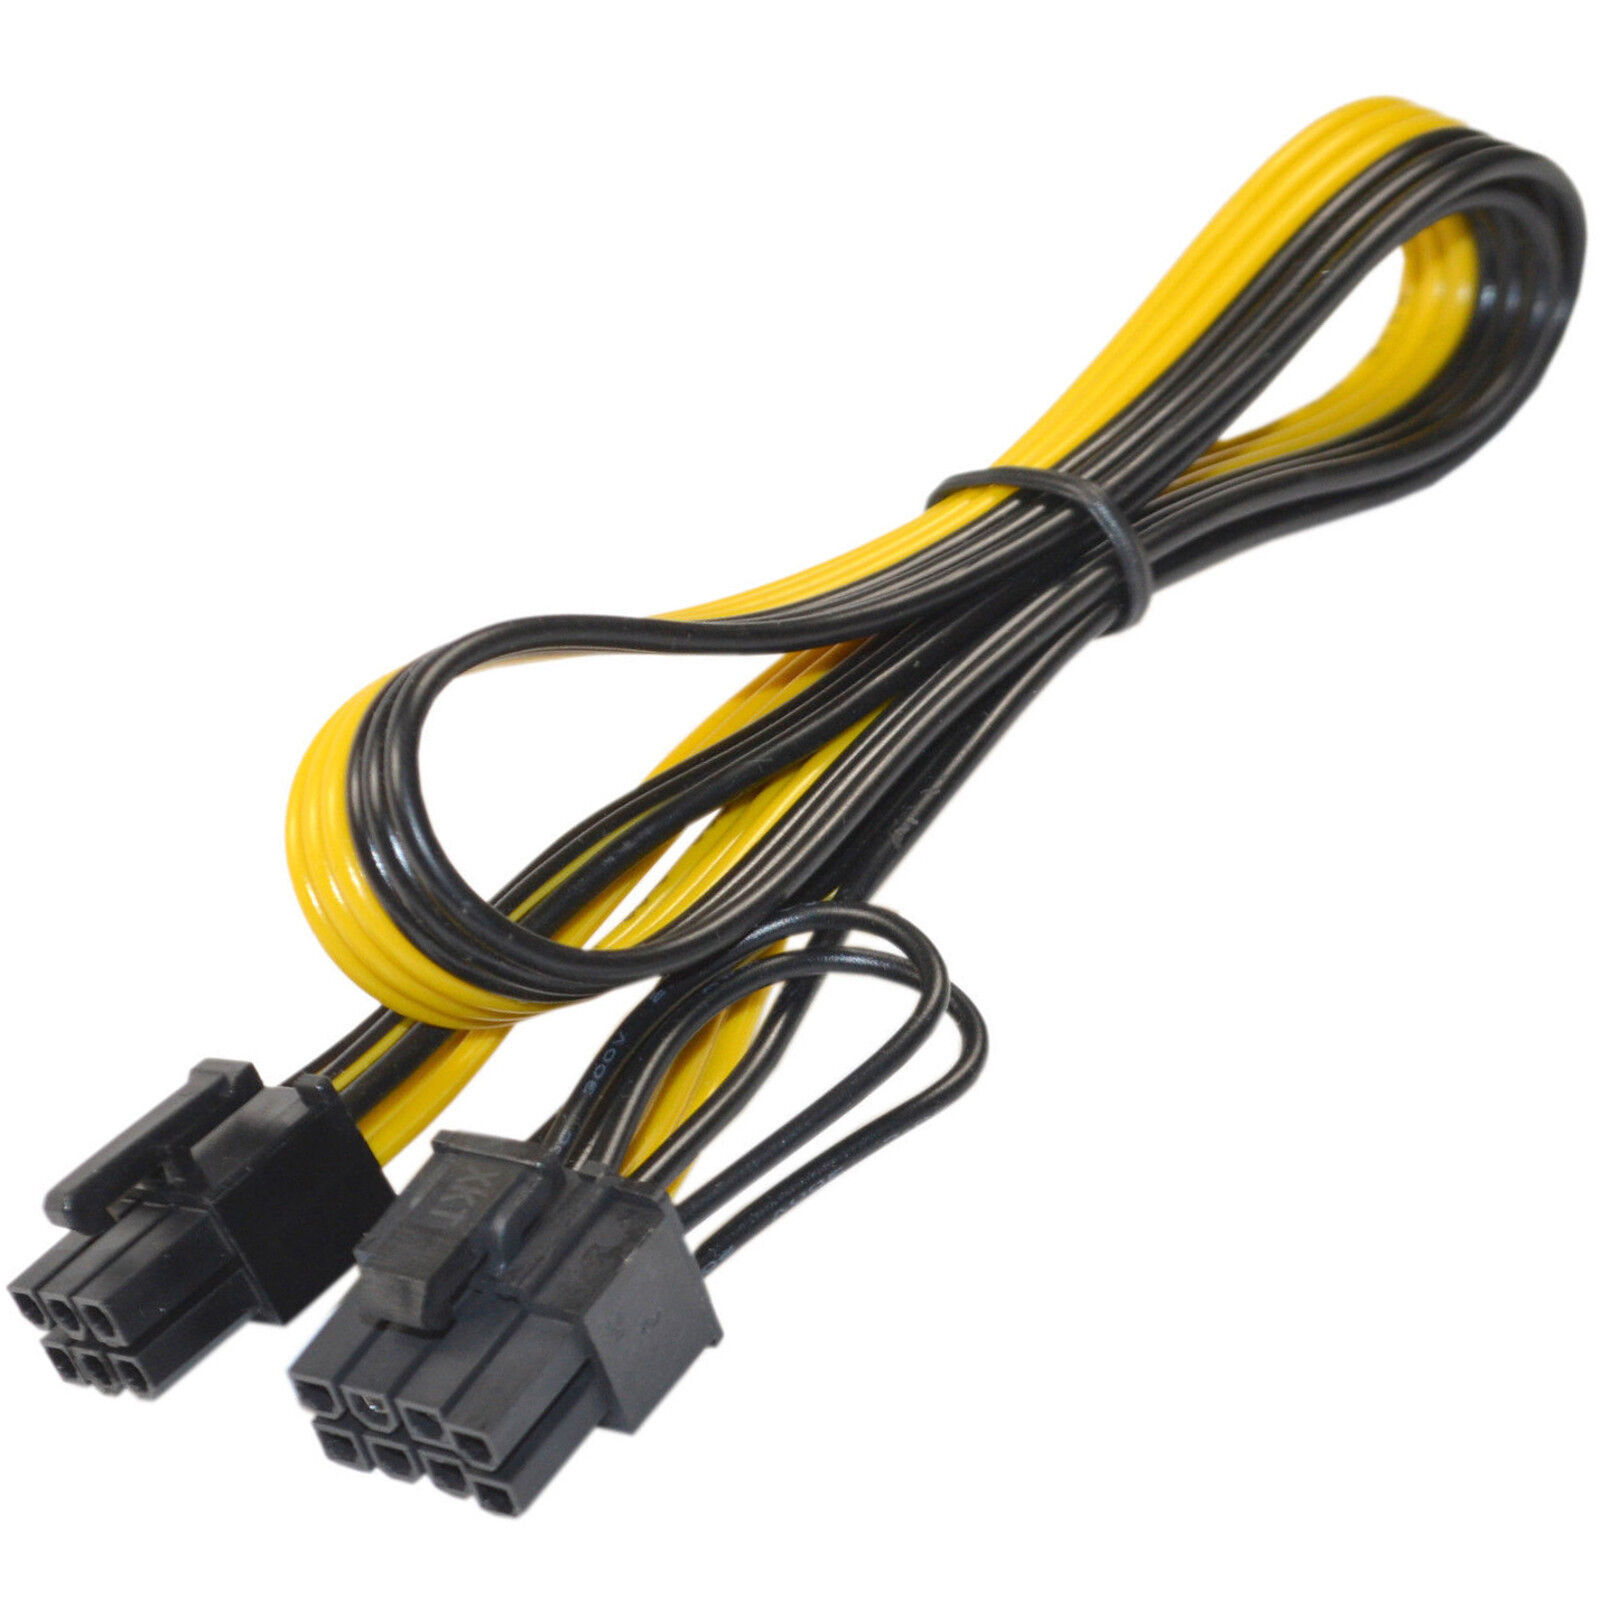 20" 6-pin to 8-pin Power Cable for GPU Video Card or Bitcoin Mining PCIE PCI-E